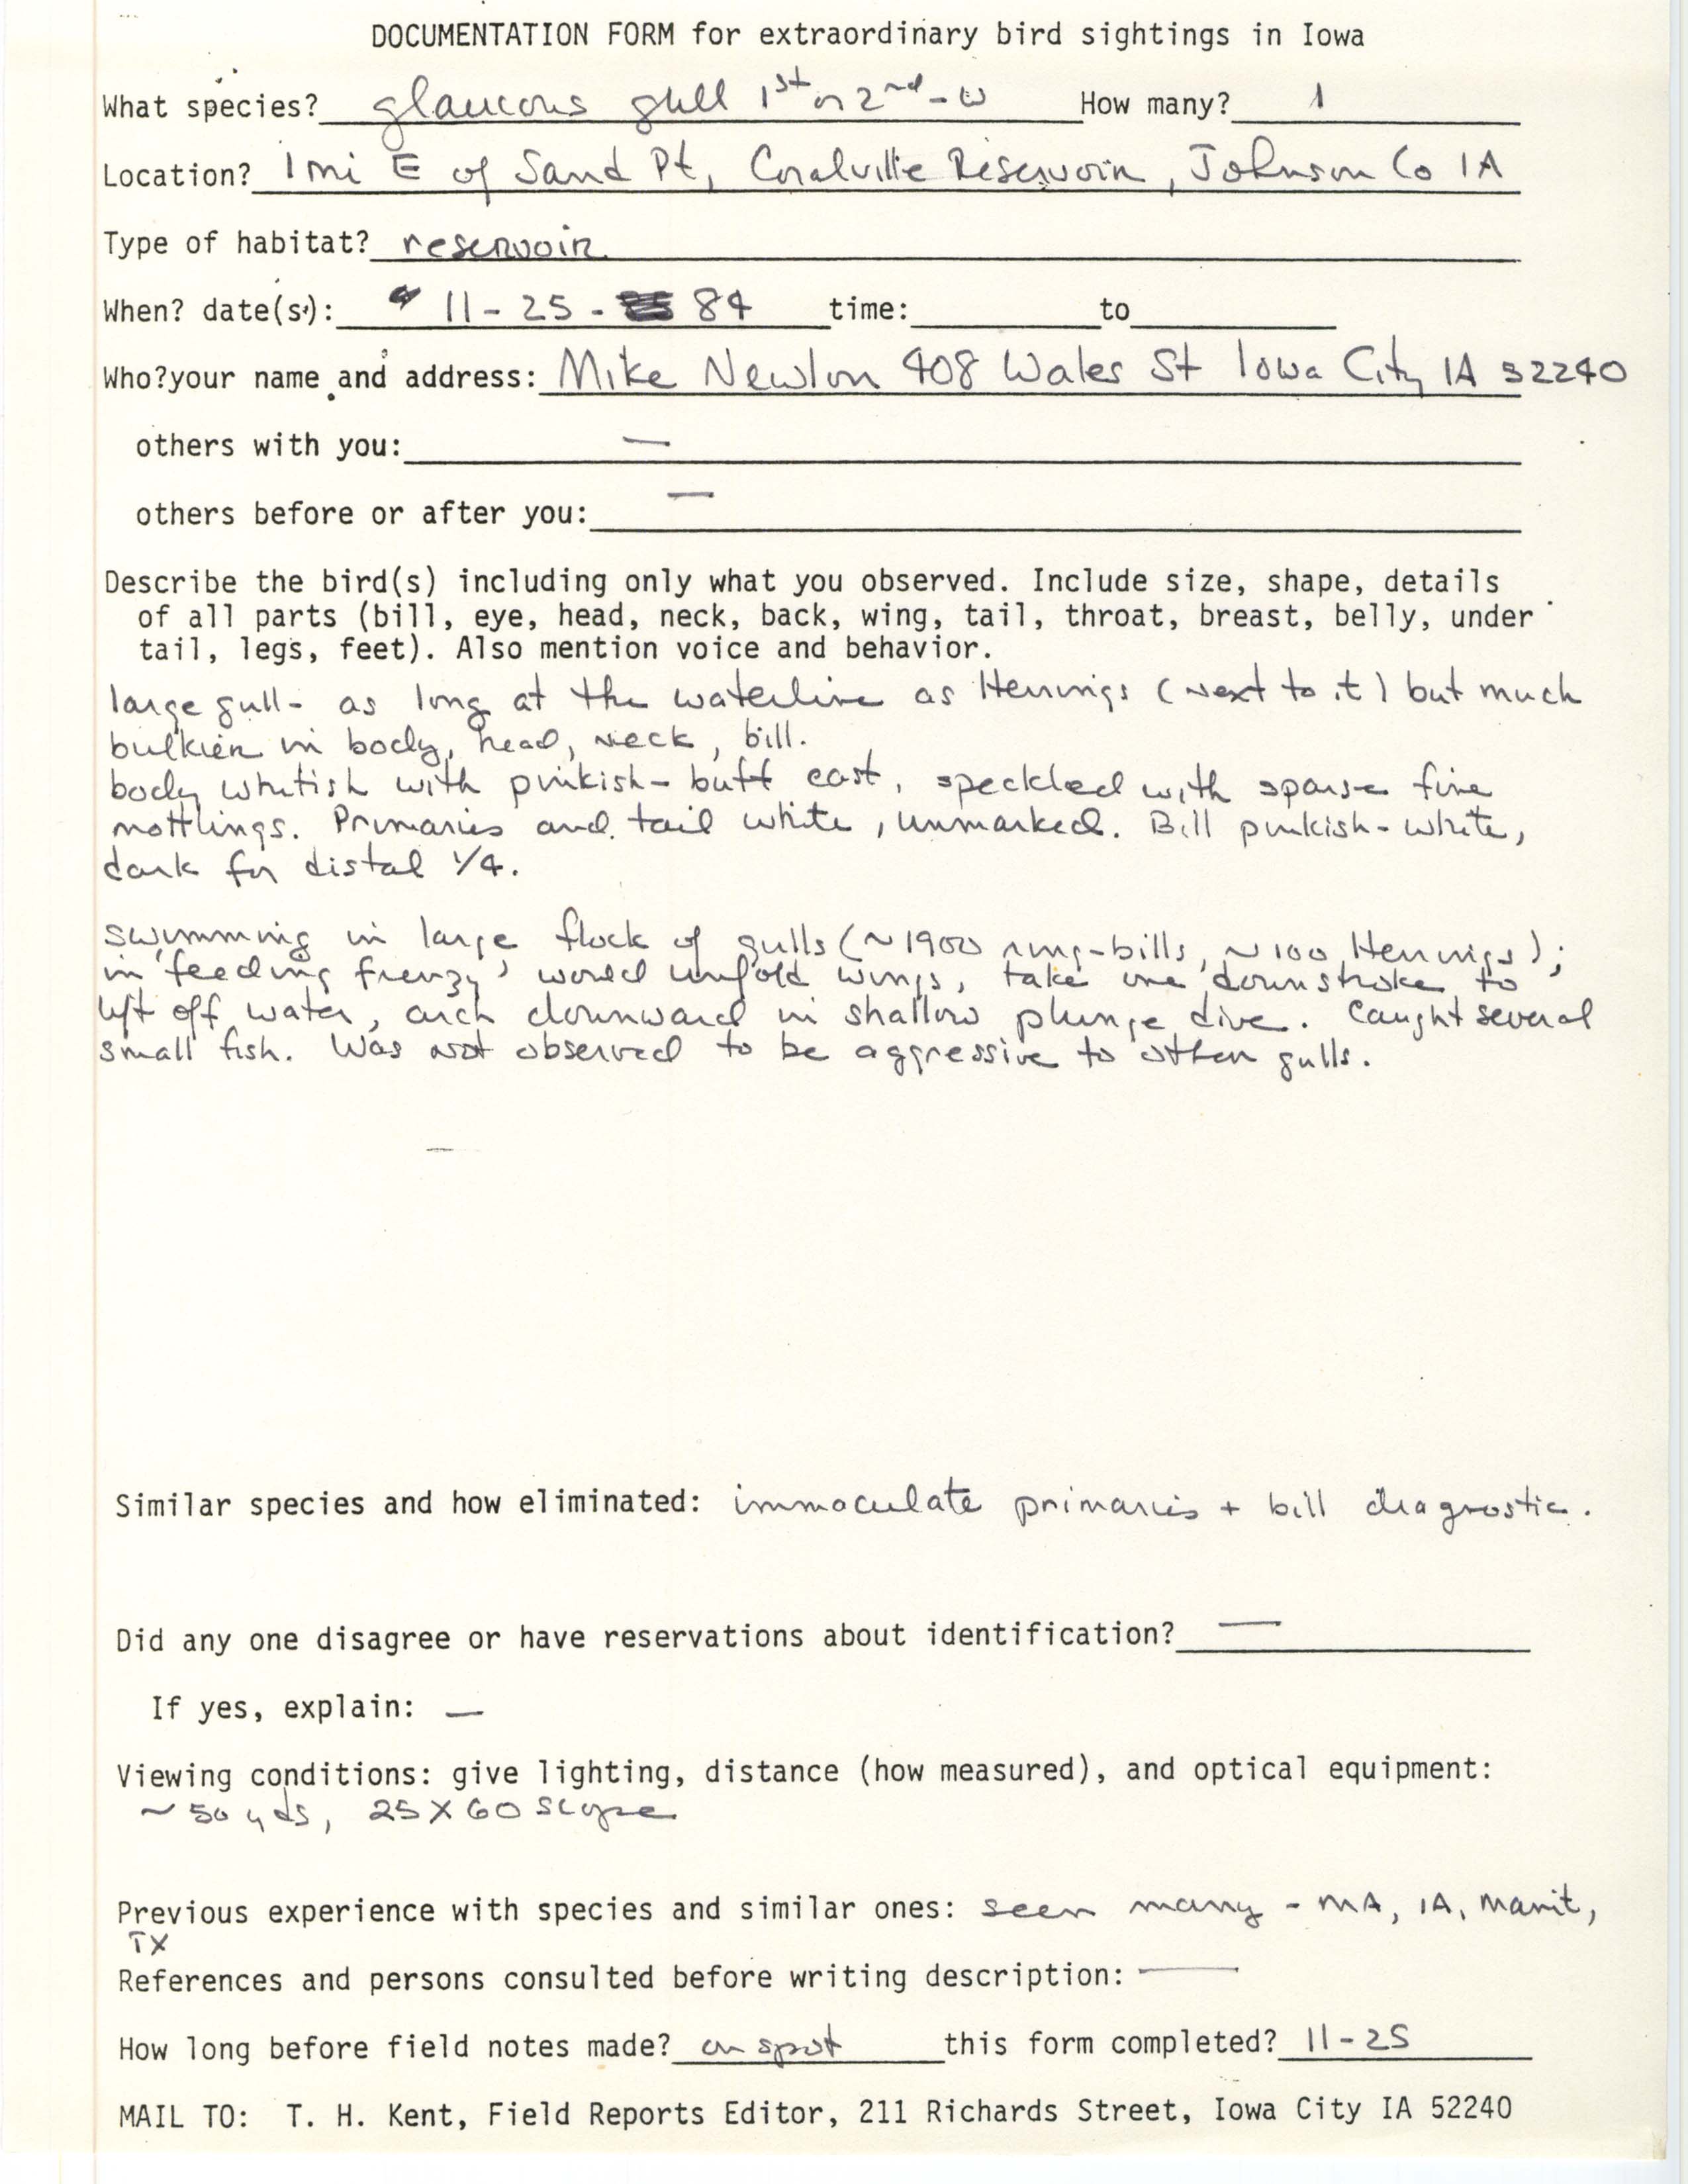 Rare bird documentation form for Glaucous Gull east of Sand Point at Coralville Reservoir, 1984